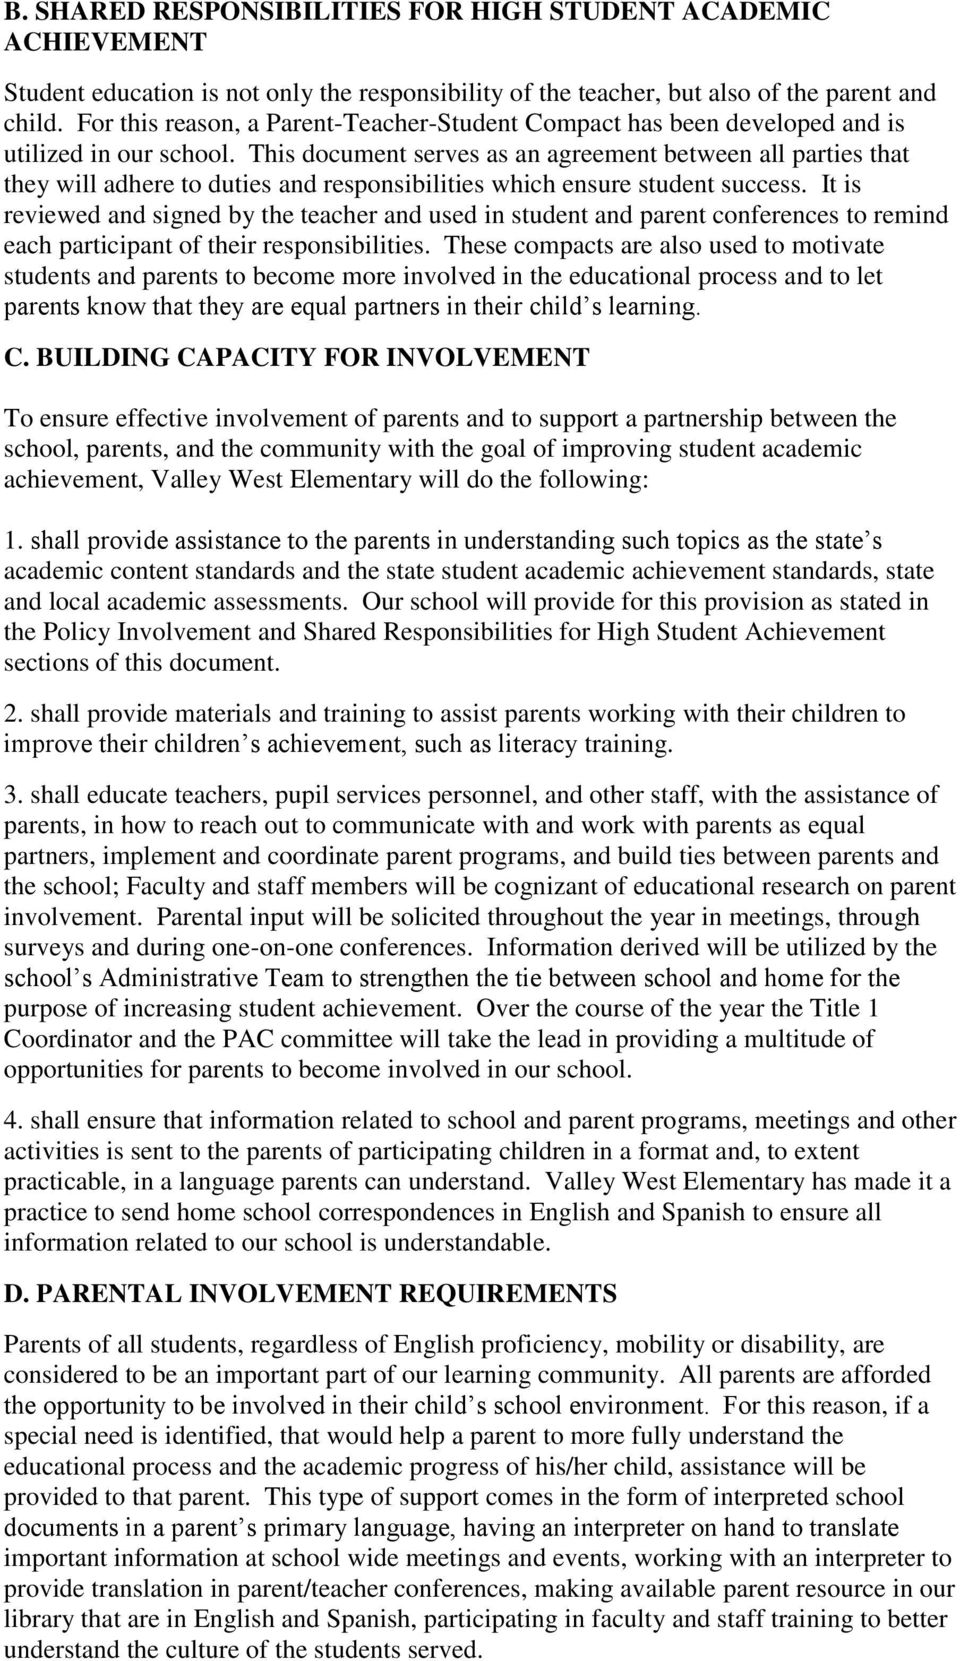 This document serves as an agreement between all parties that they will adhere to duties and responsibilities which ensure student success.